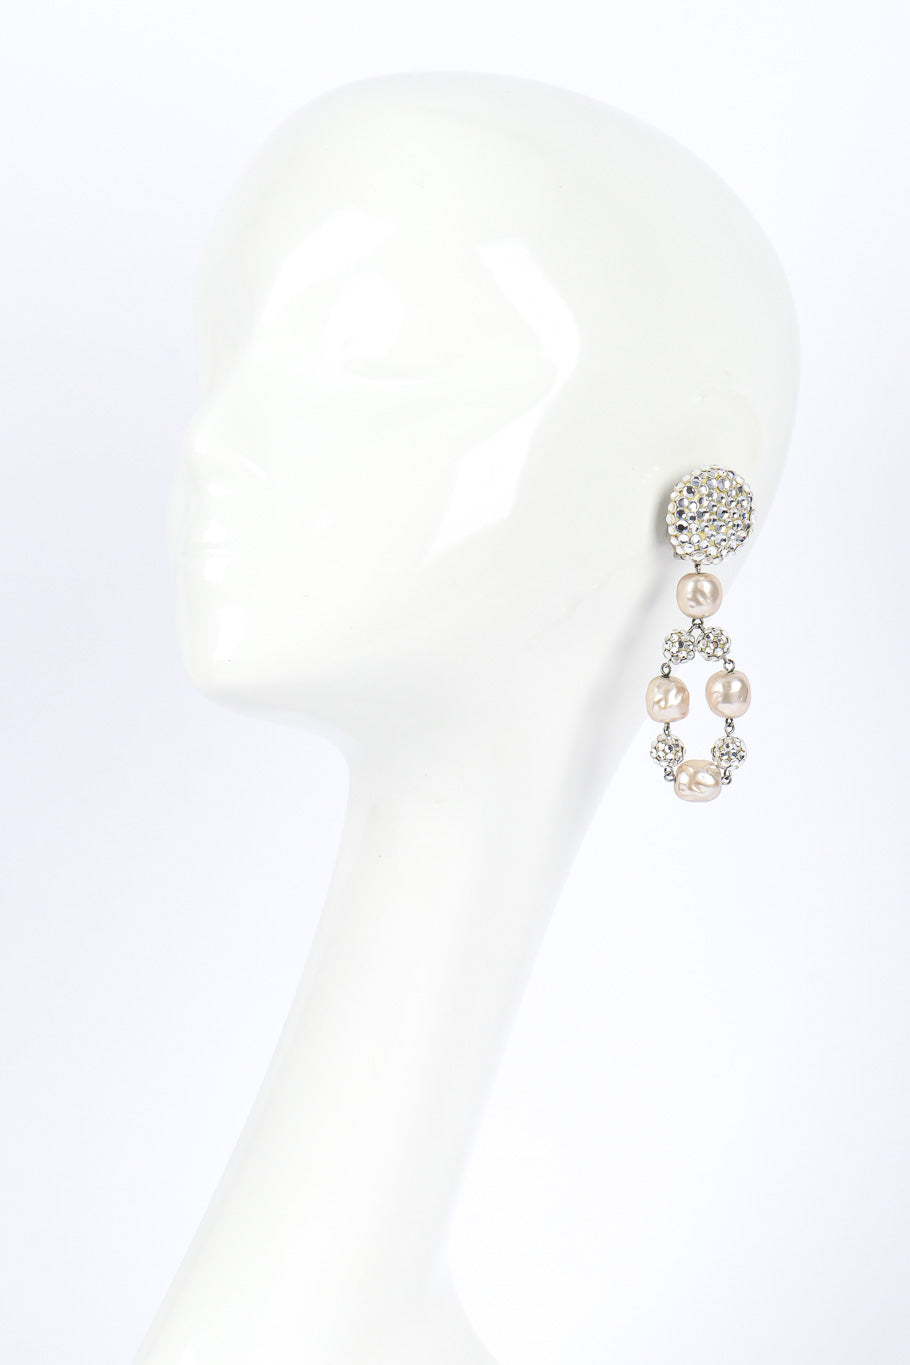 Pearl drop earrings by James Arpad on white background on mannequin head @recessla